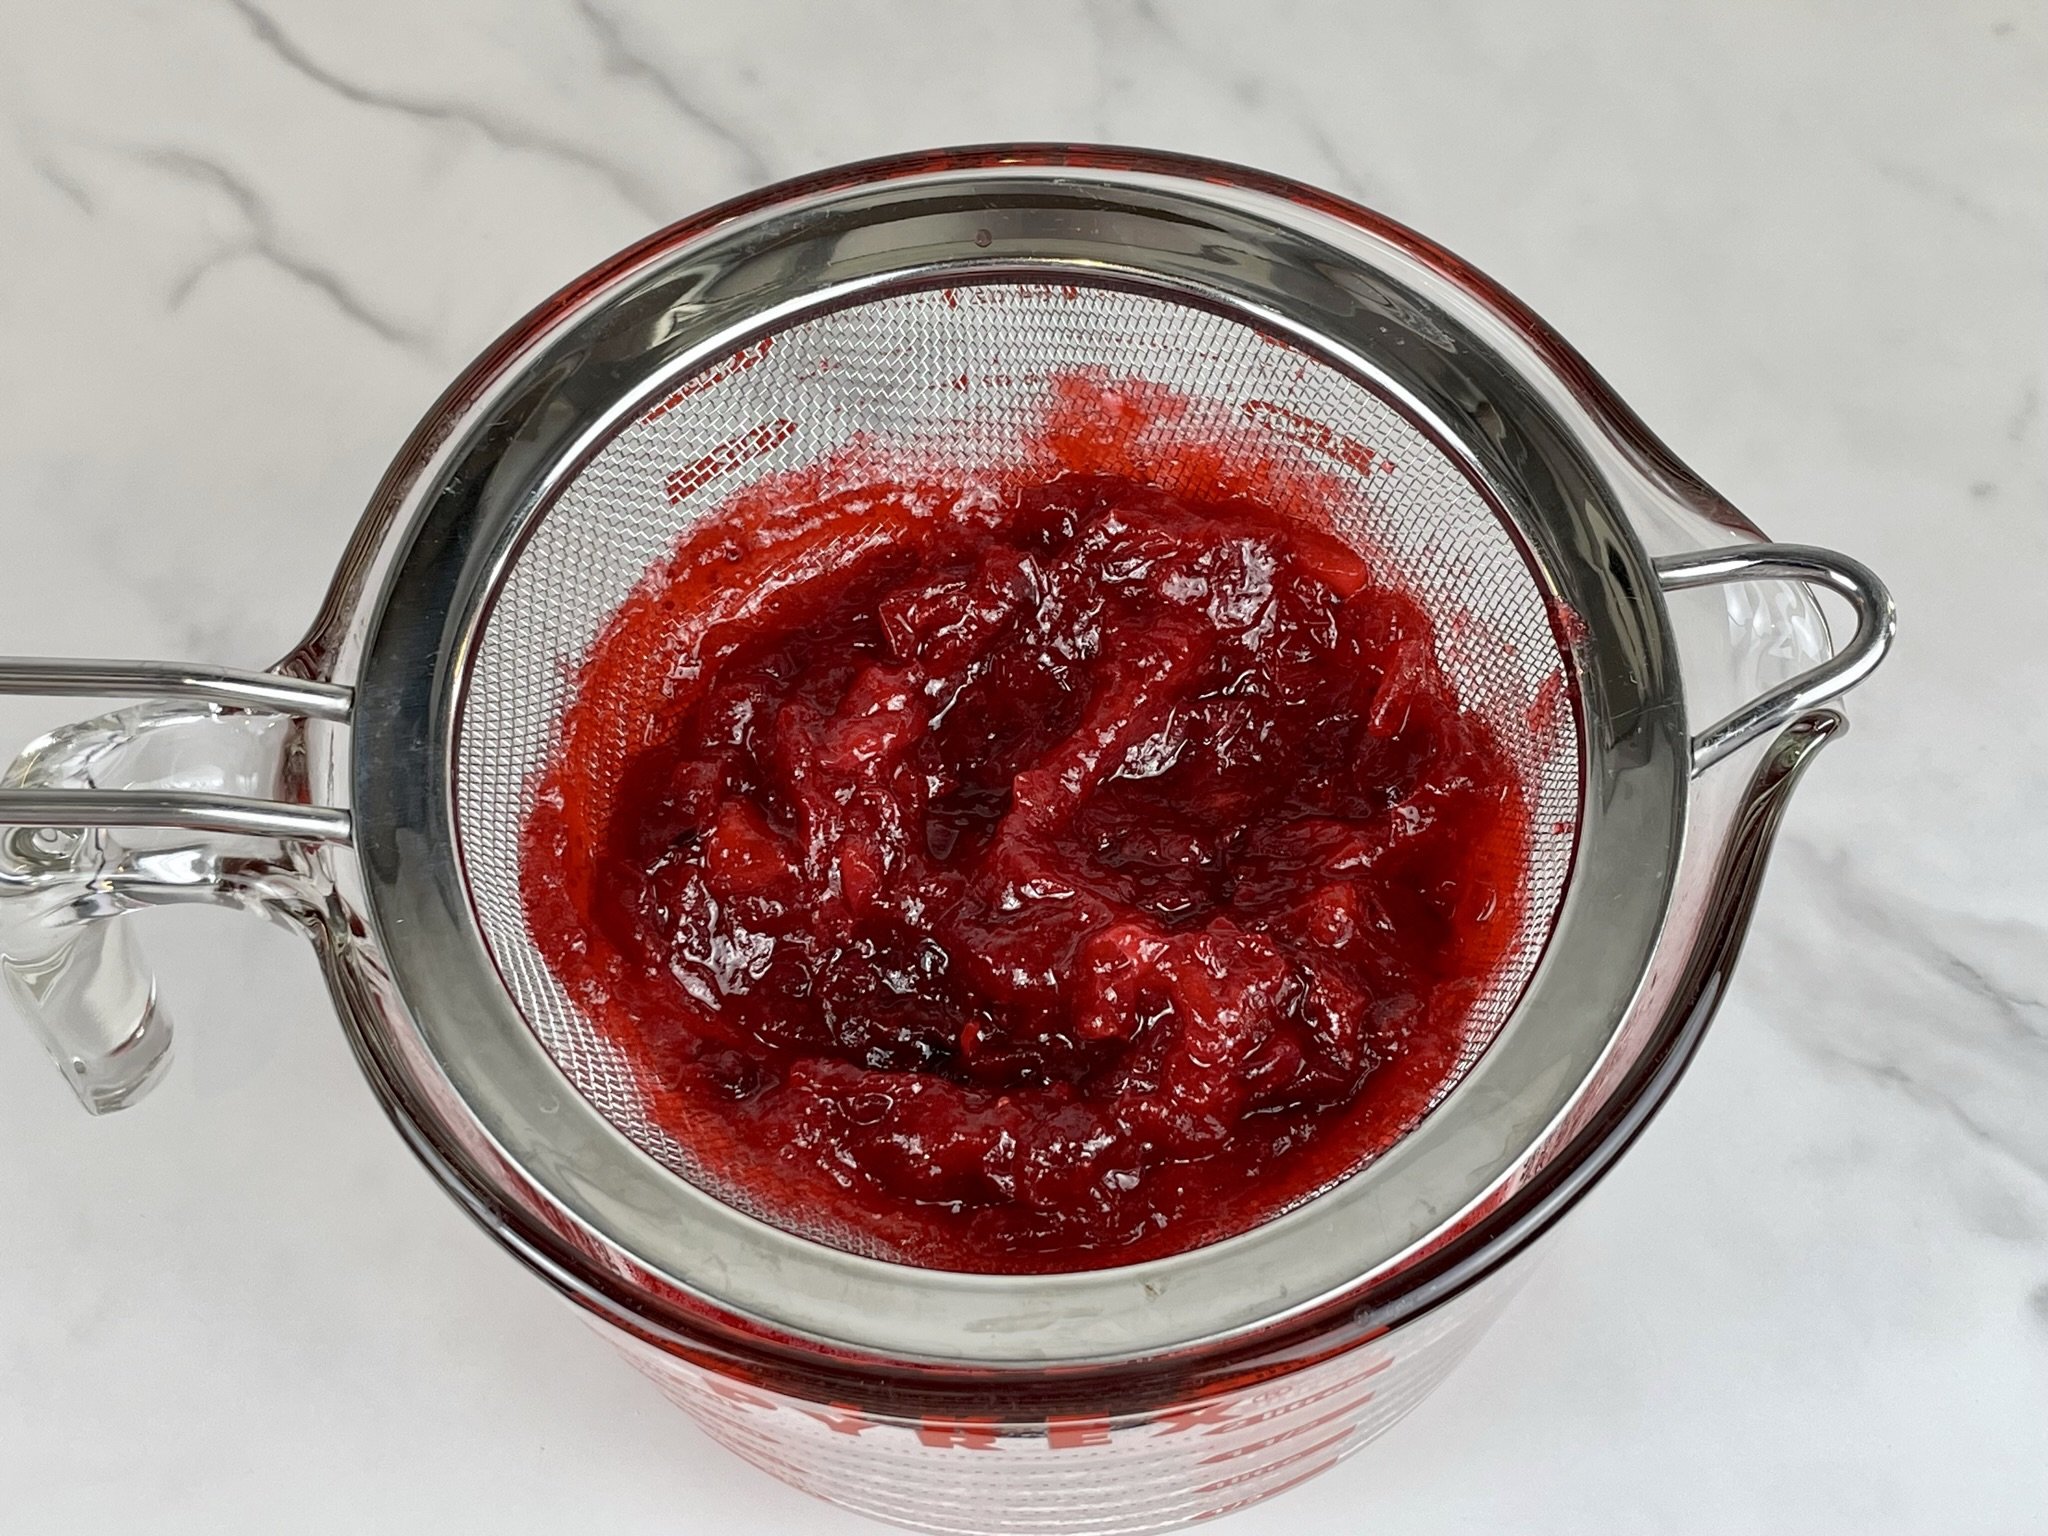 Cranberry topping.